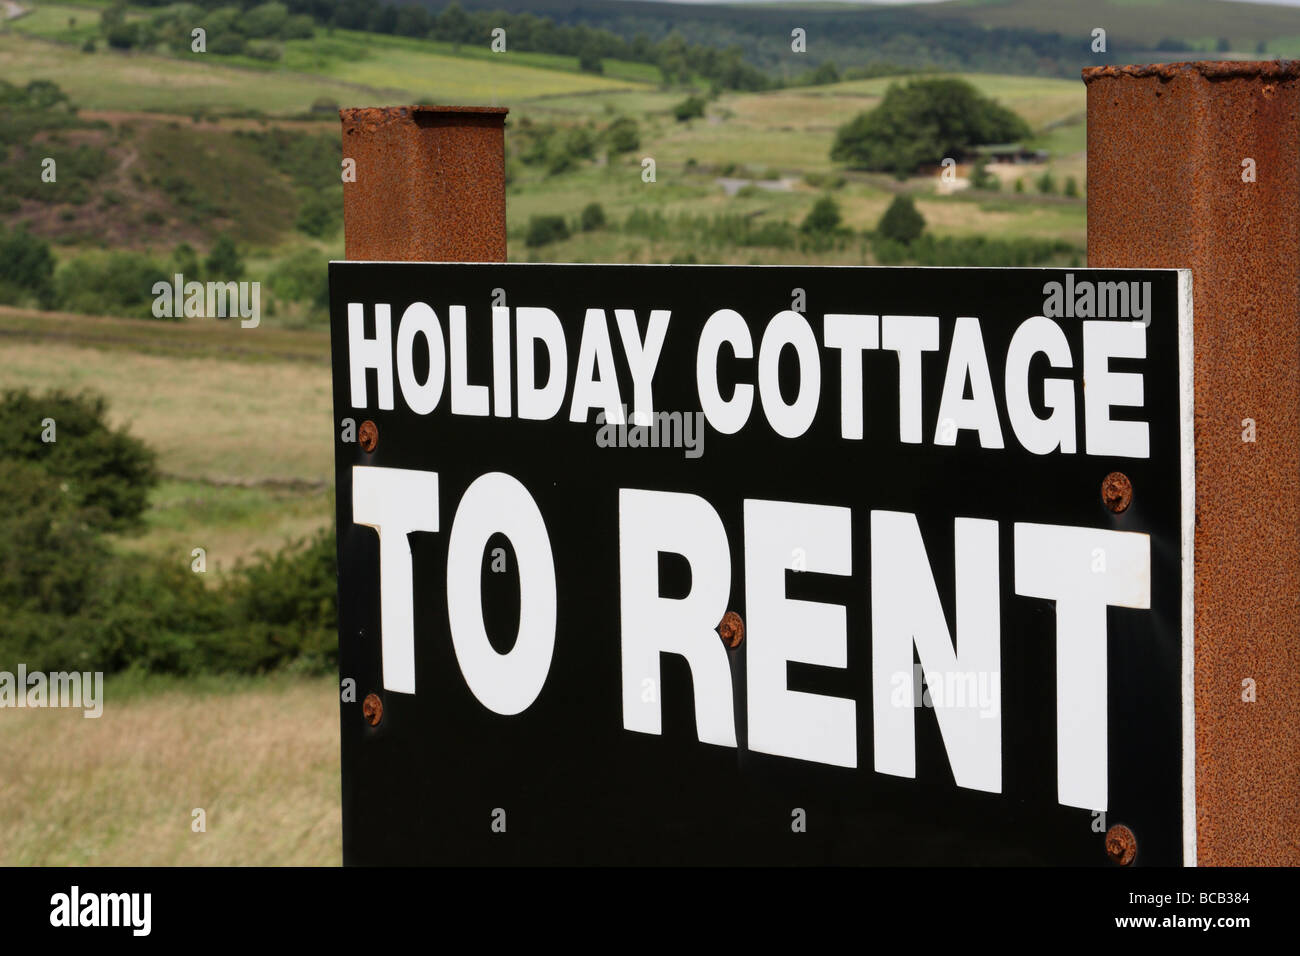 Holiday cottage to rent sign in the English countryside. Stock Photo